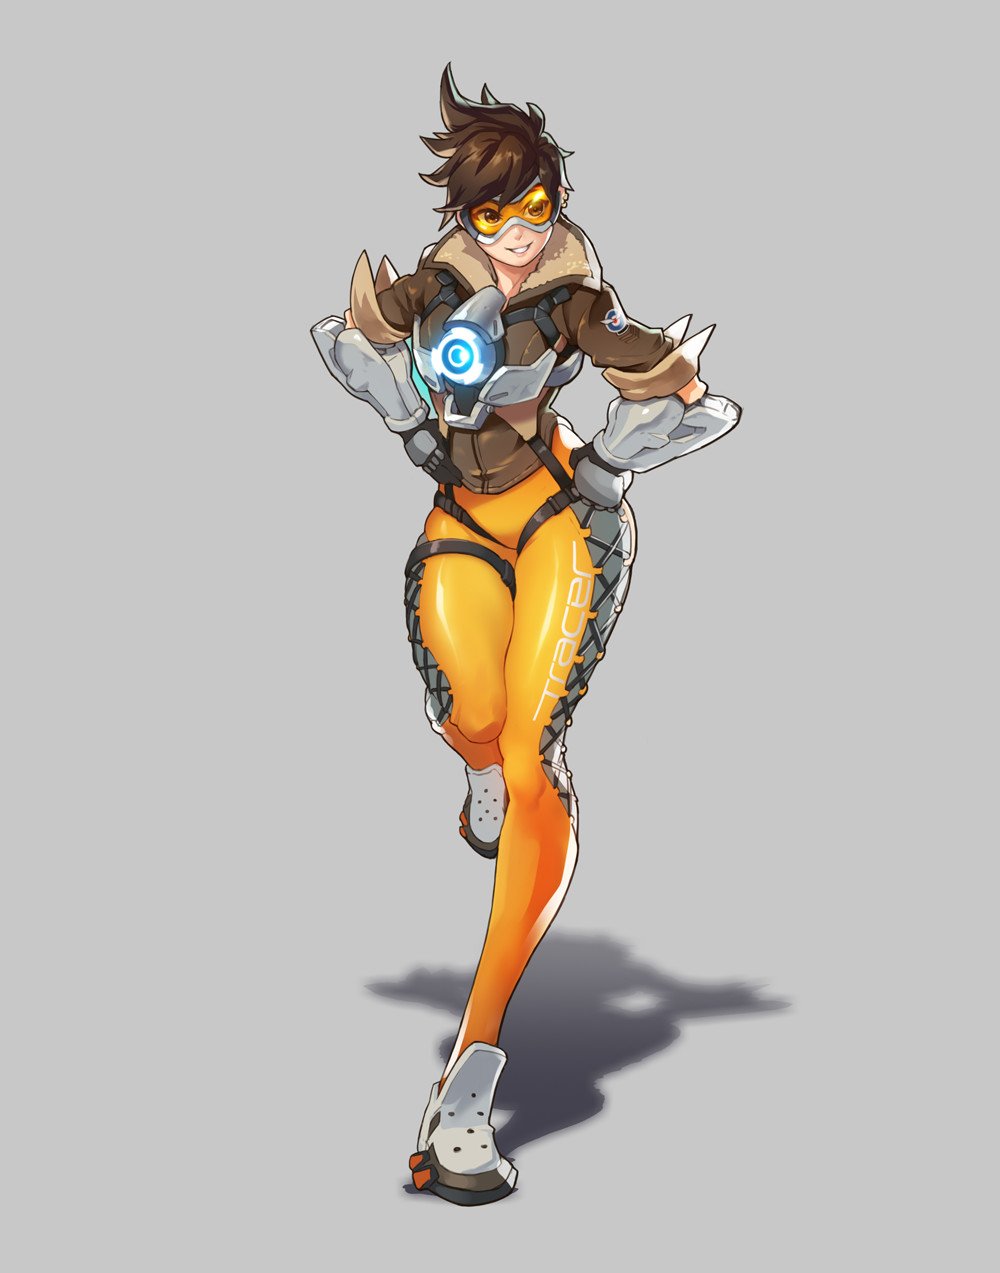 video game characters, Overwatch, Tracer (Overwatch), drawing, fan art